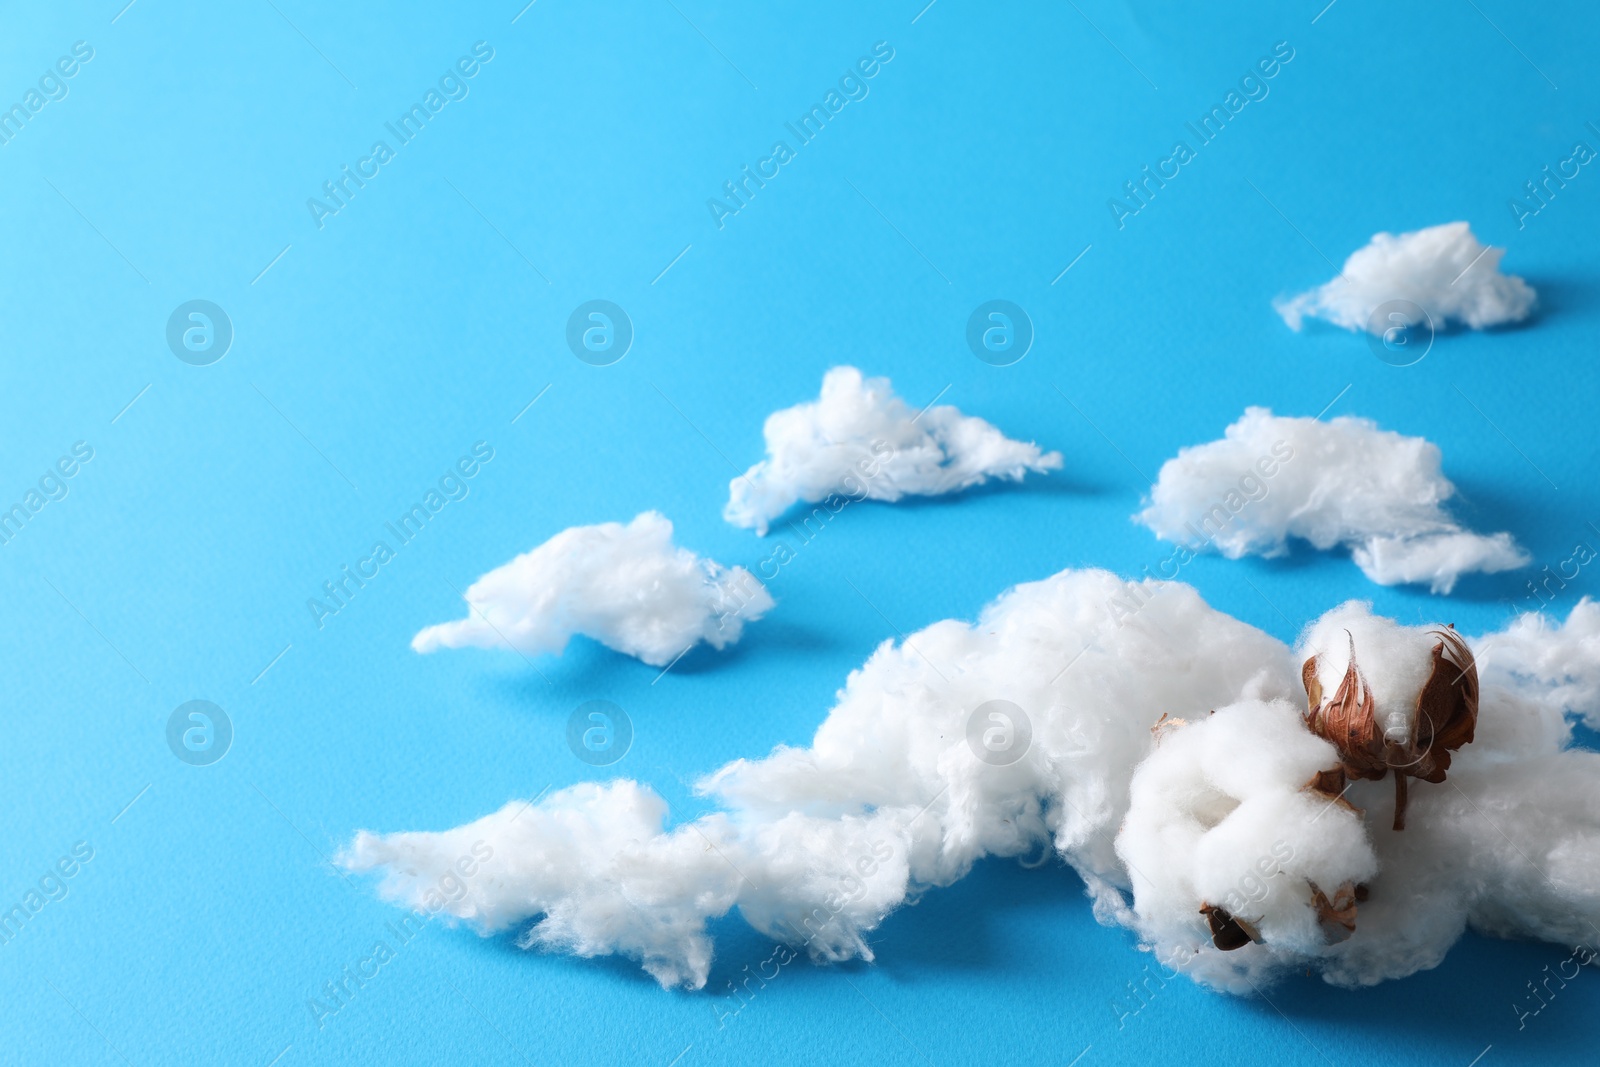 Photo of Clouds made of cotton and soft flowers on blue background. Space for text